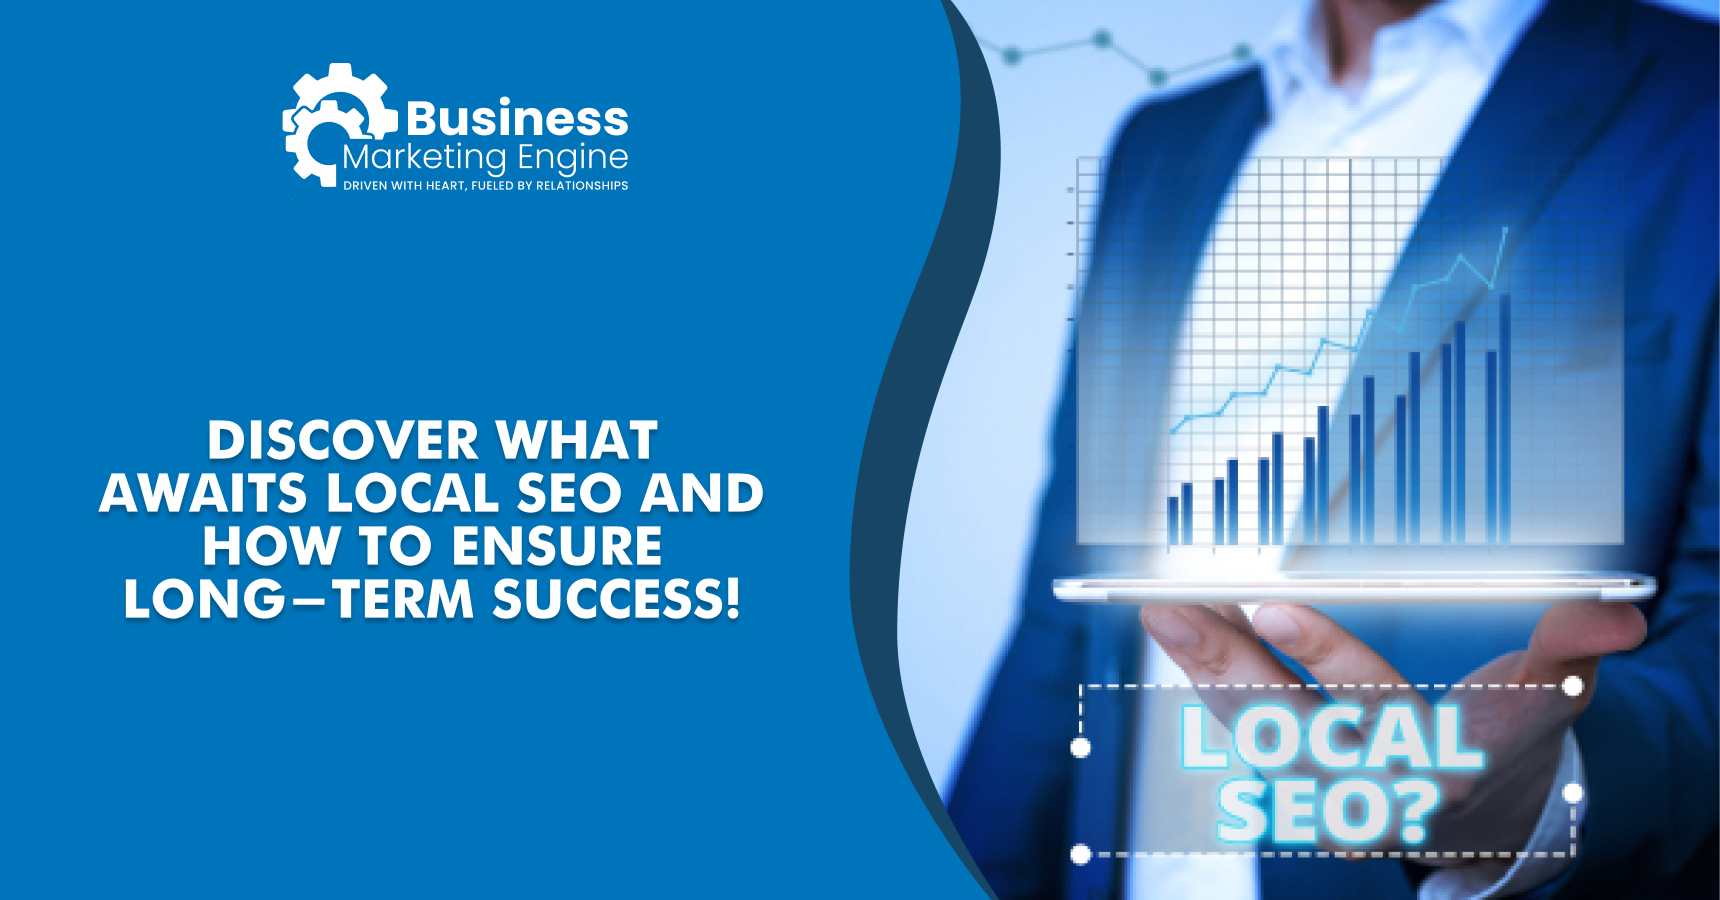 Discover what awaits local SEO and how to ensure long term success